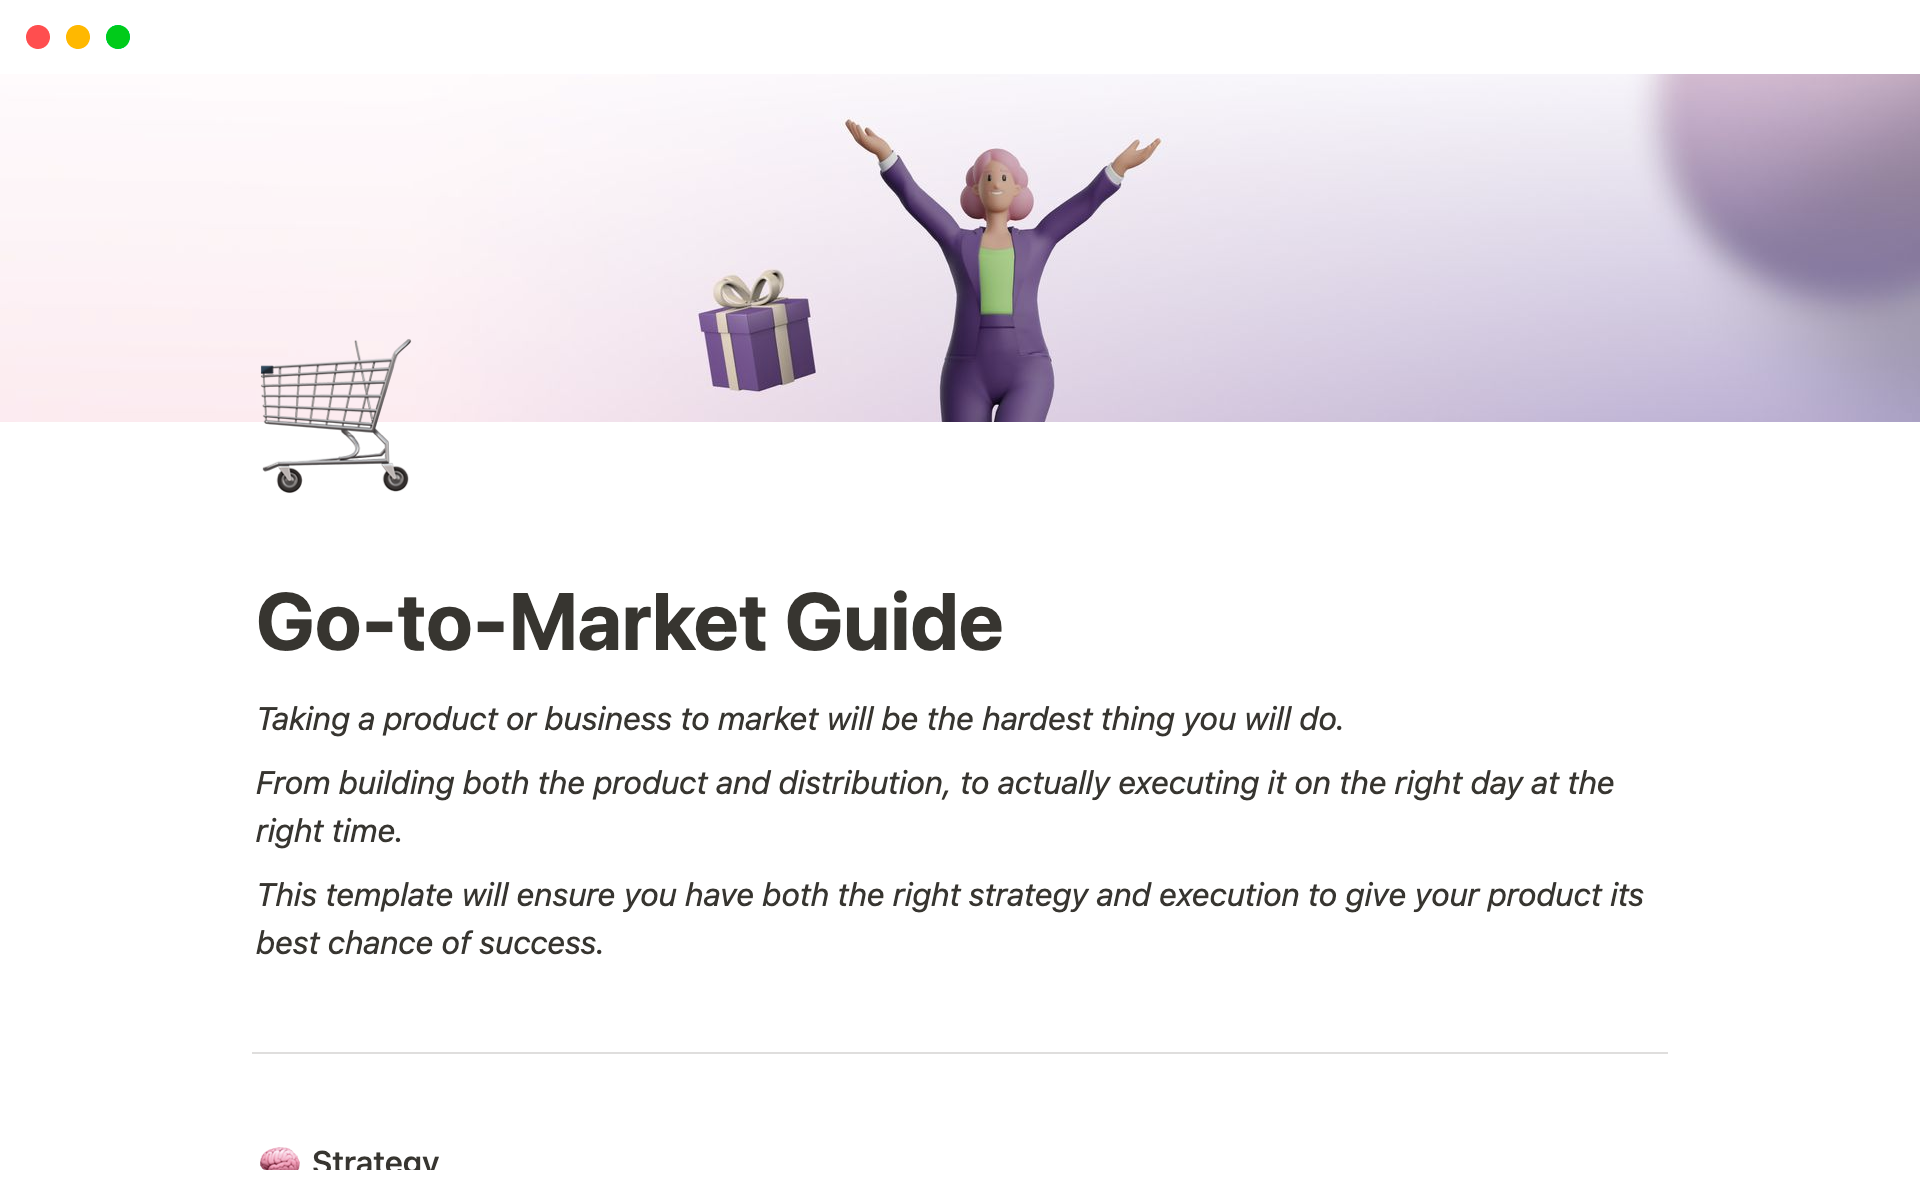 Go to market guide